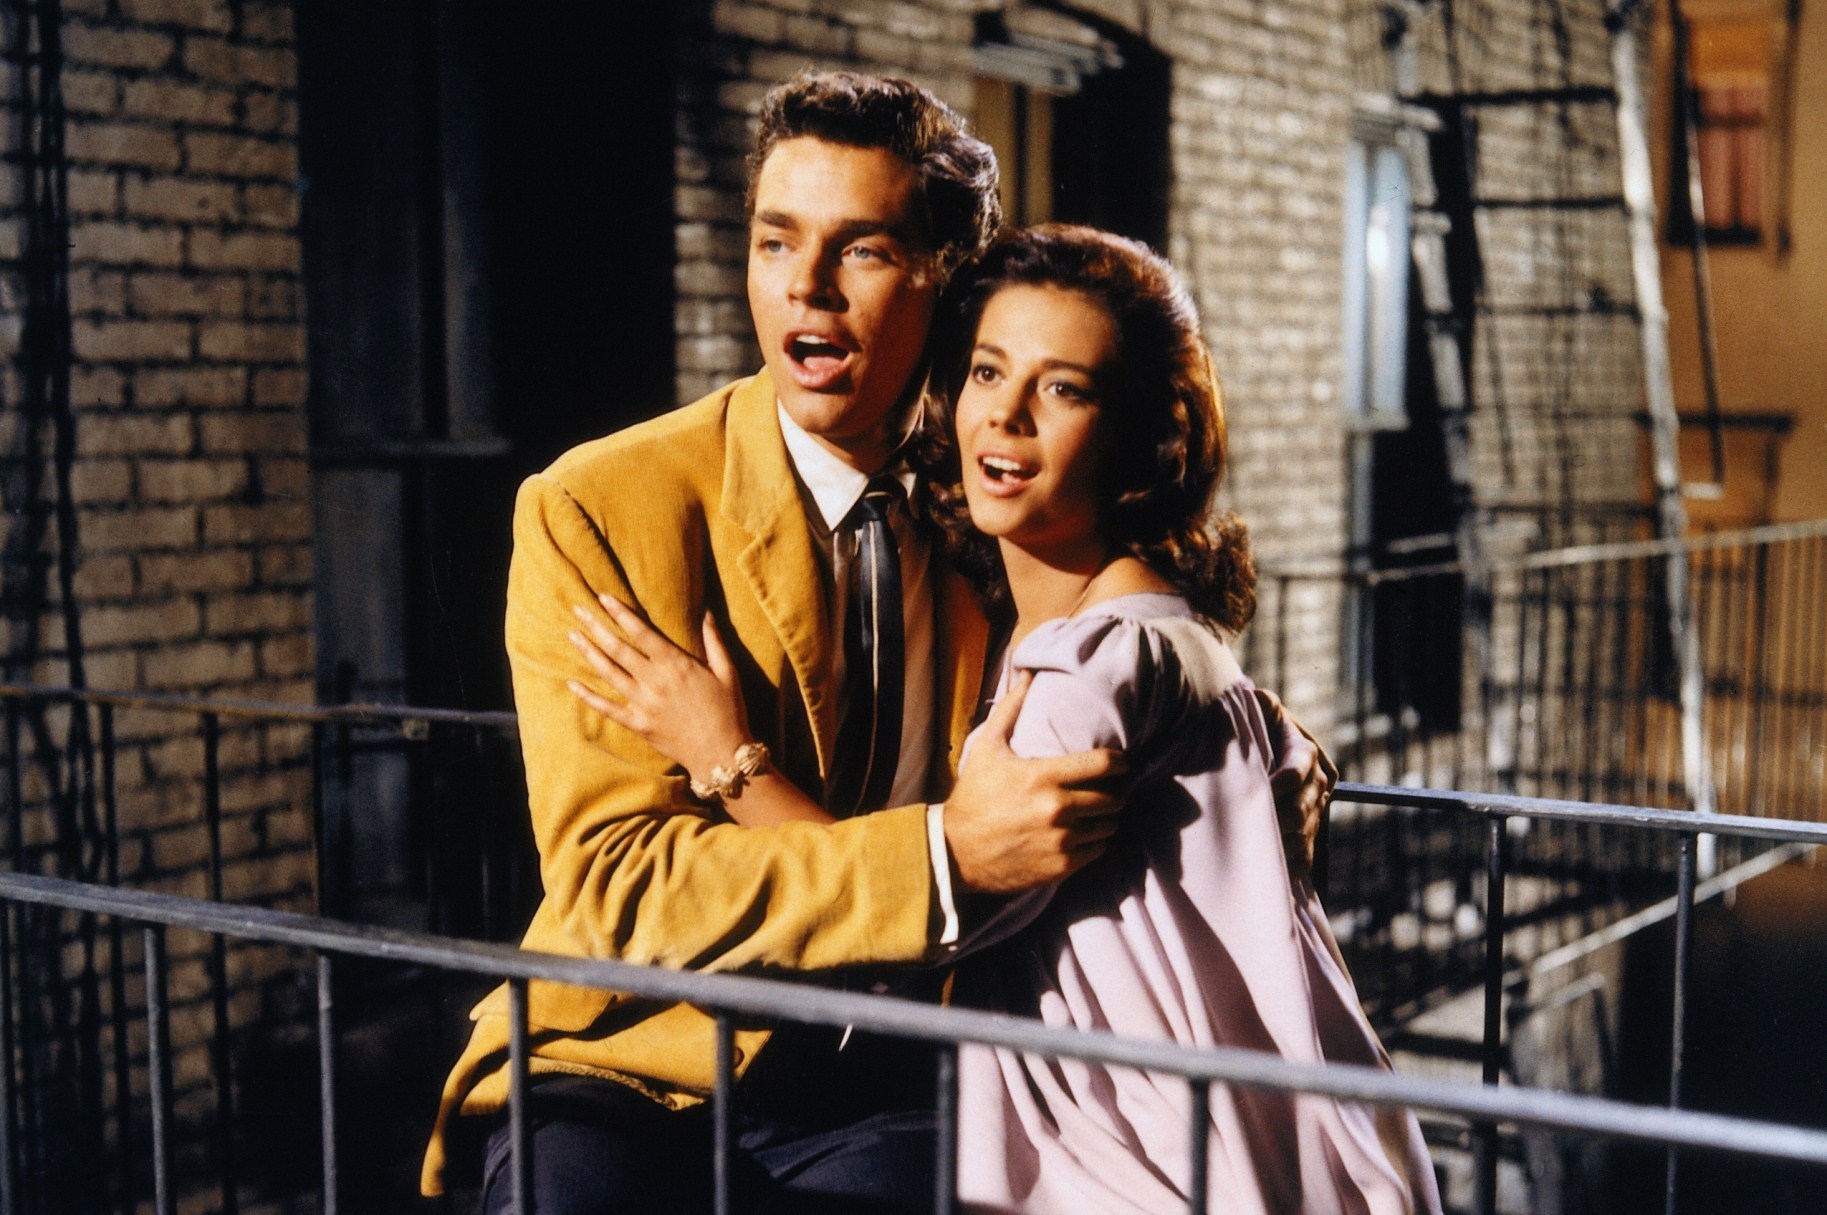 Natalie Wood and Richard Beymer in "West Side Story."